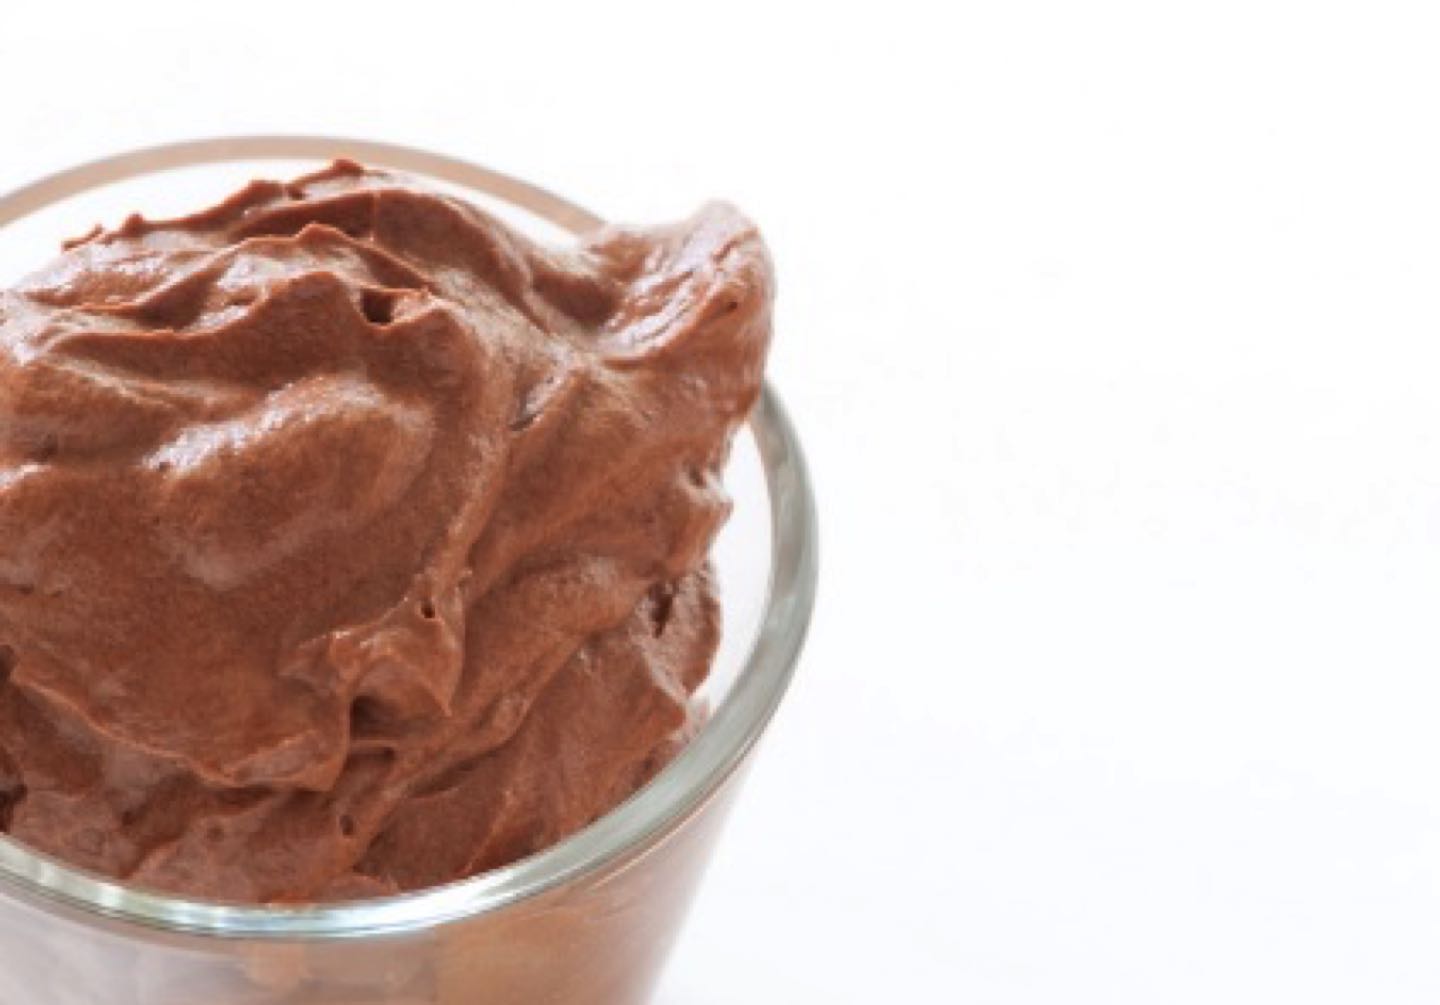 sweet and healthy recipe for chocolate mousse